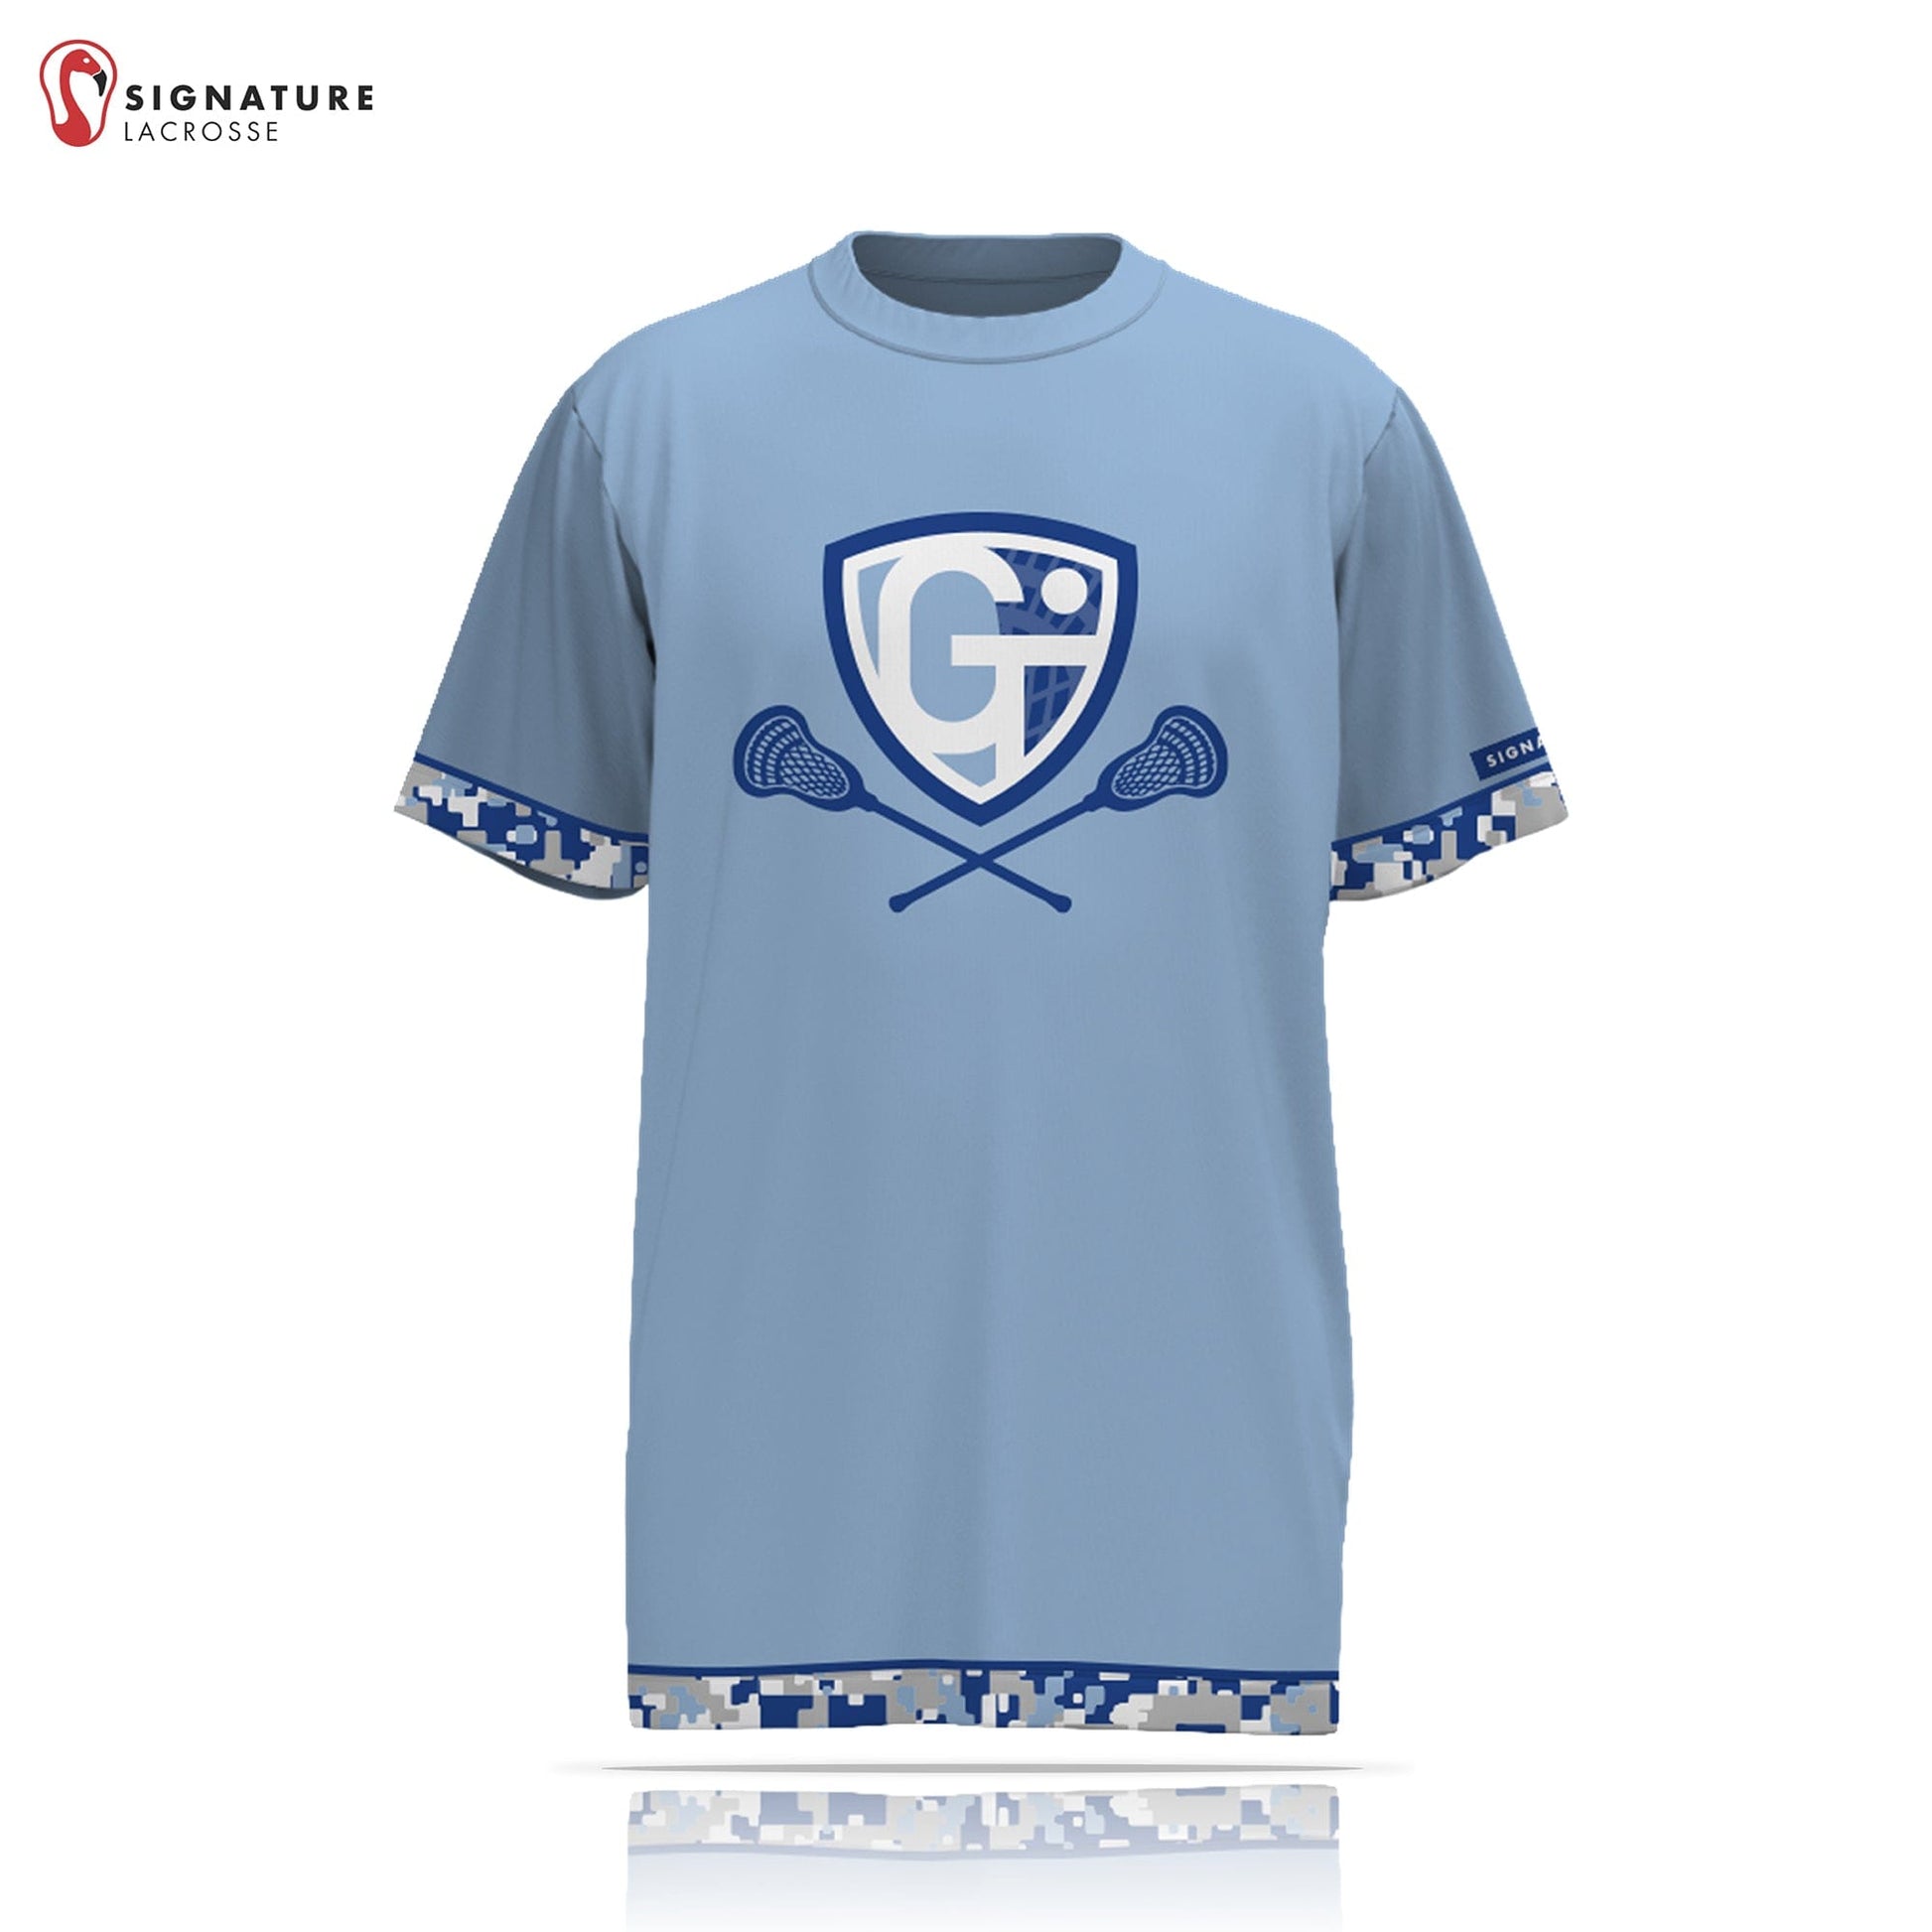 Georgetown-Triton Youth Lacrosse Player Short Sleeve Shooting Shirt: 3-4 Signature Lacrosse